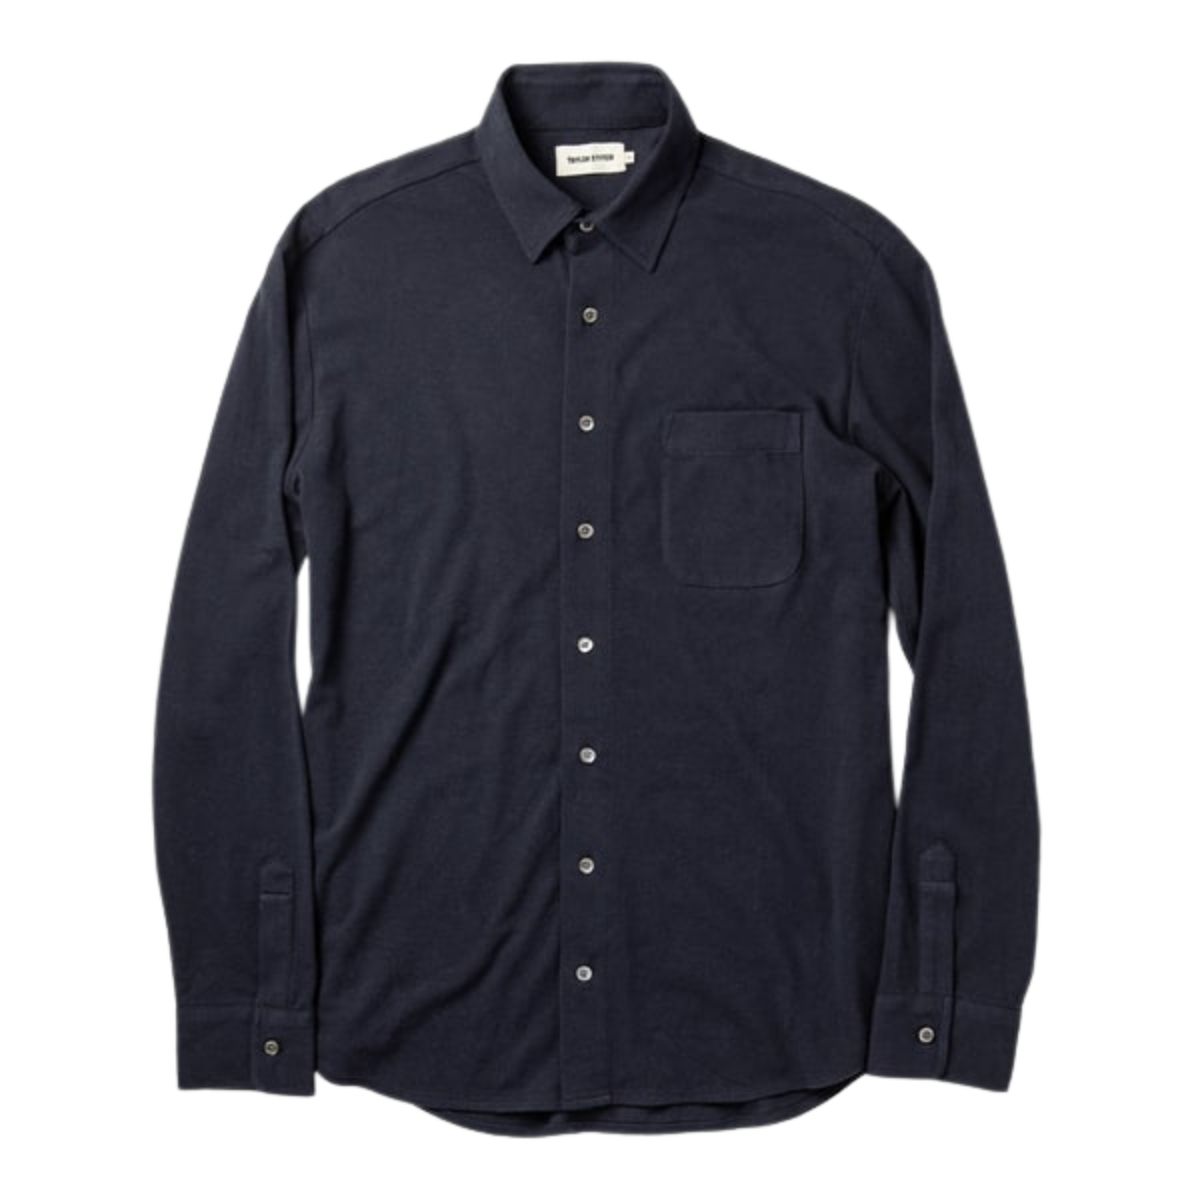 This Navy Pique California Shirt From Taylor Stitch Is The Bomb - BroBible